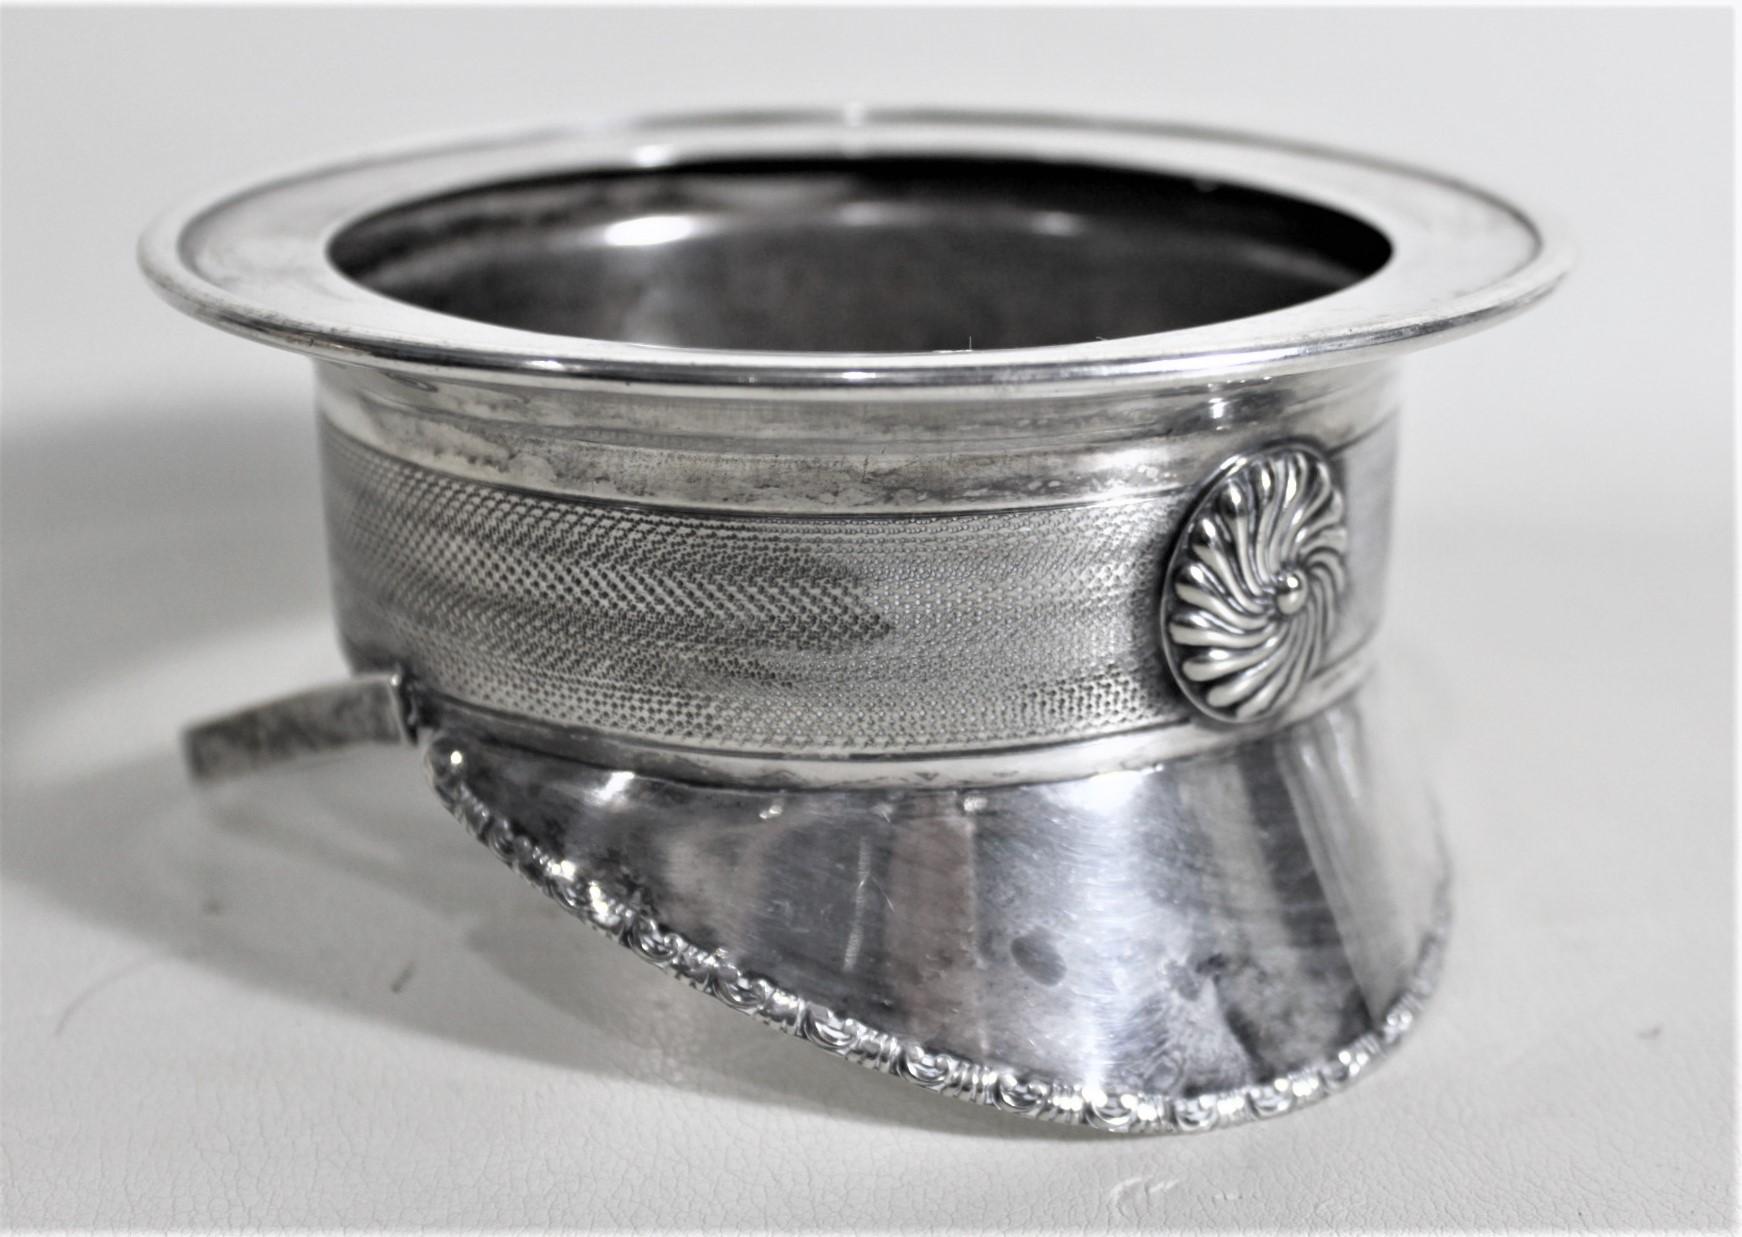 This very detailed and unique silver plated hat stand is hallmarked by an unknown maker, but presumed to have been made in England in approximately 1910 in the period style. This hat is done in a silver plated metal and is an extremely realistically